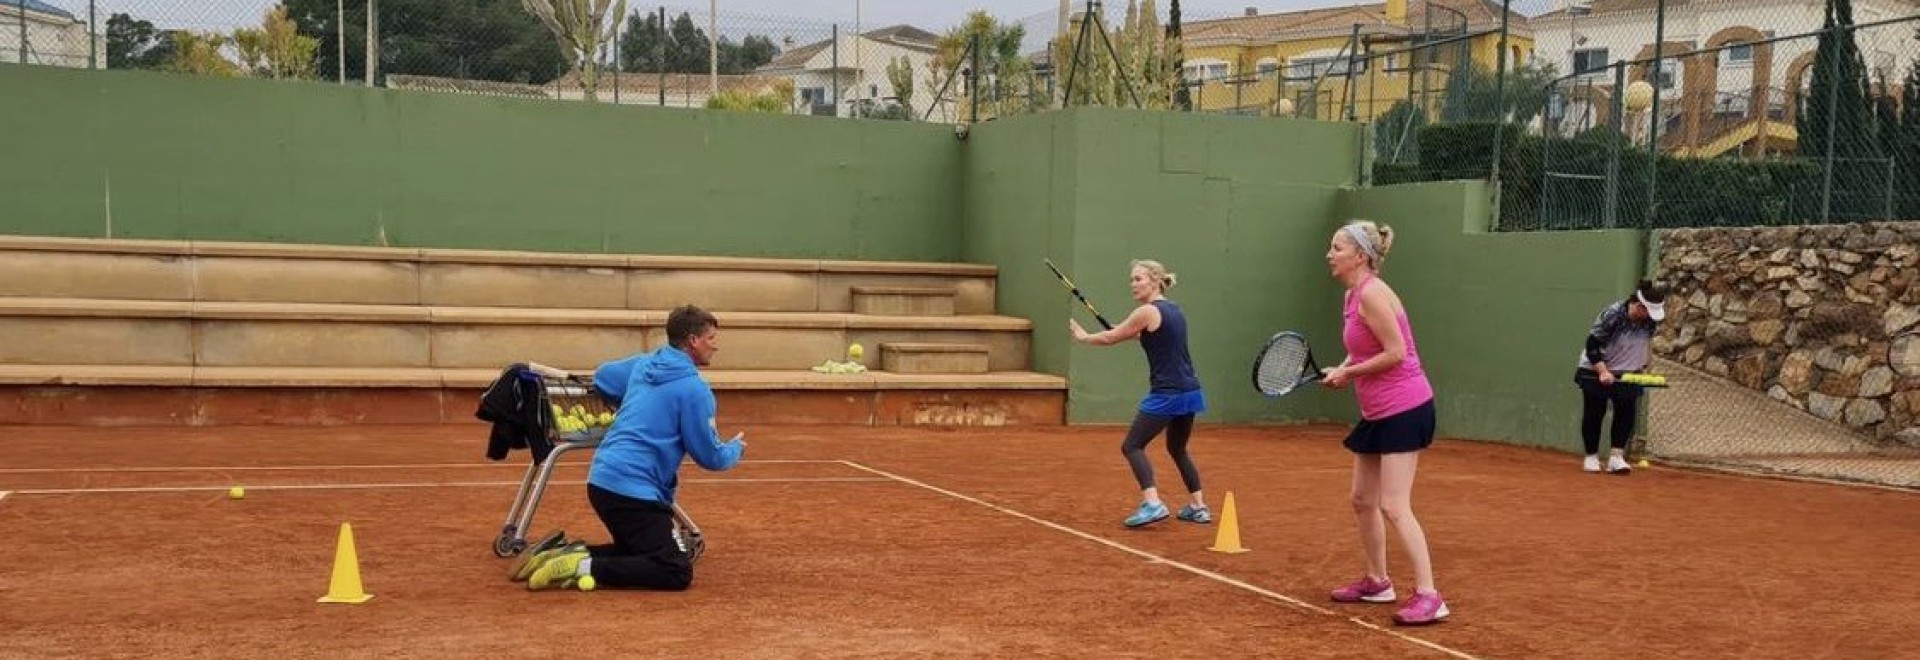 5-Day Adult Tennis Academy  - The Racquets Club at La Manga, Spain